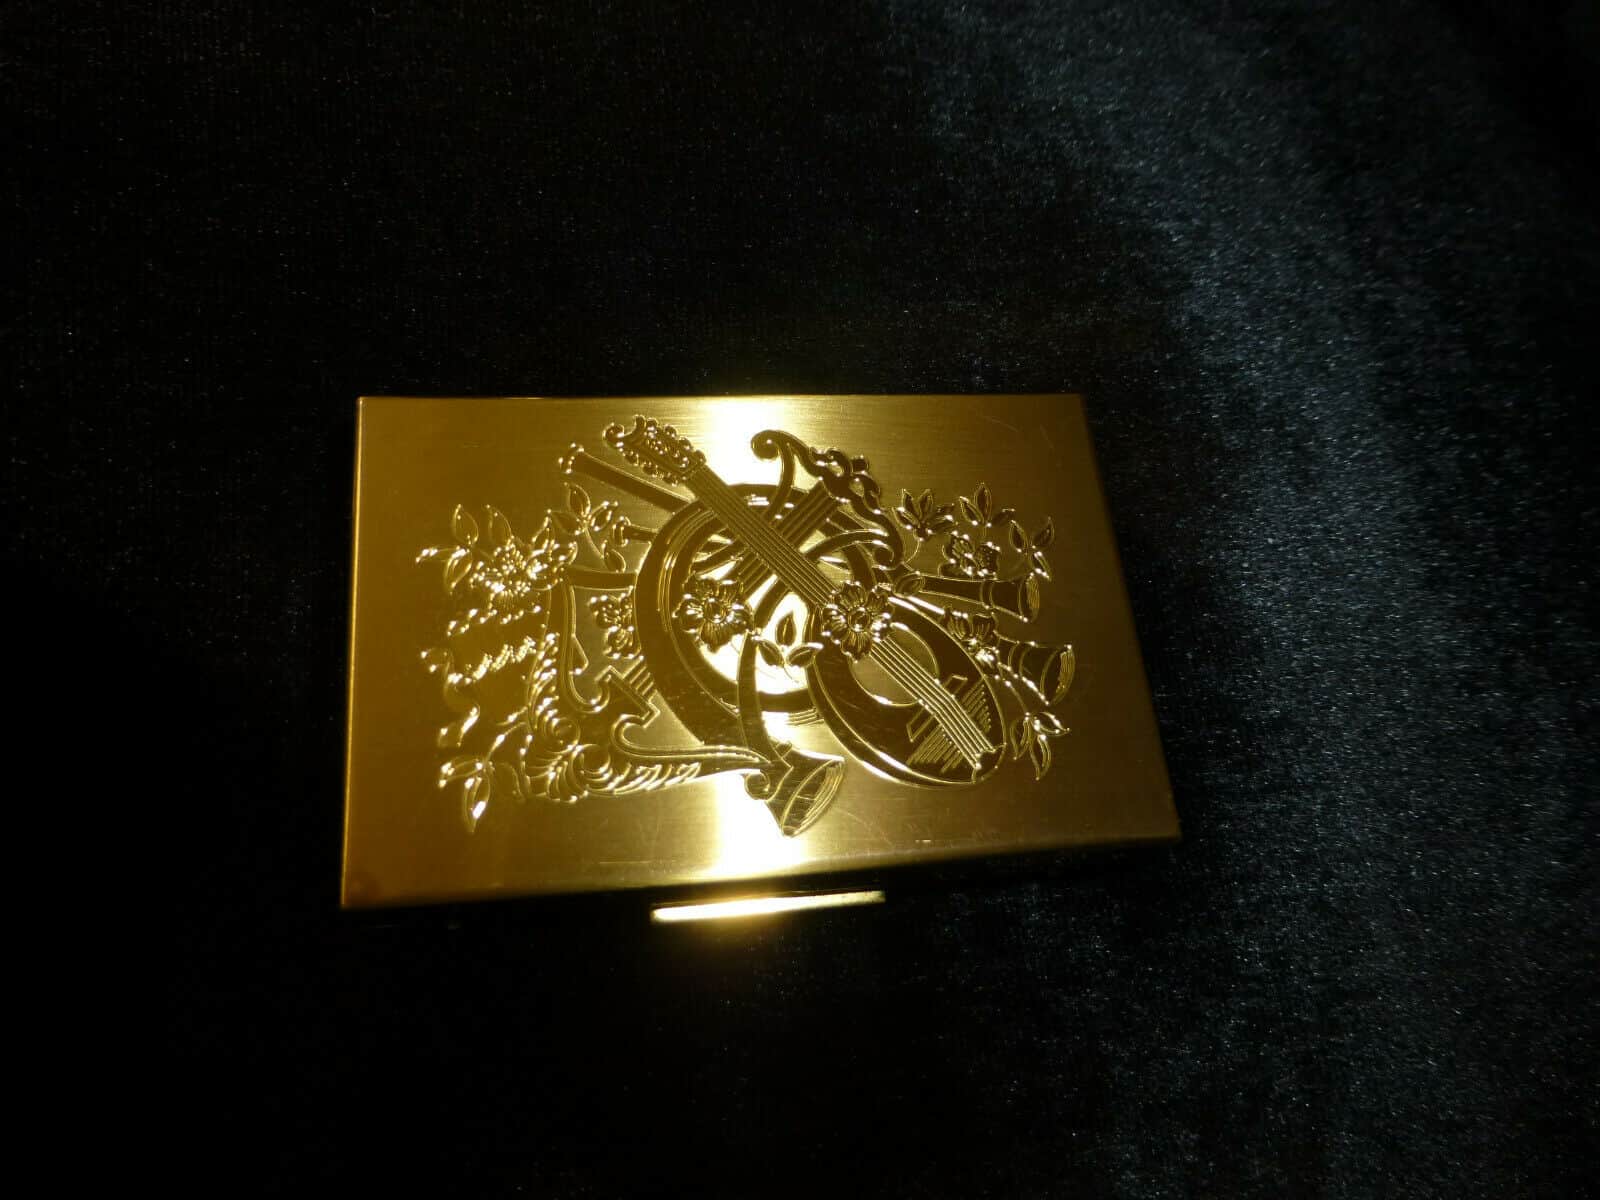 Gold Plated Powder Compact With a Miniature Music Box